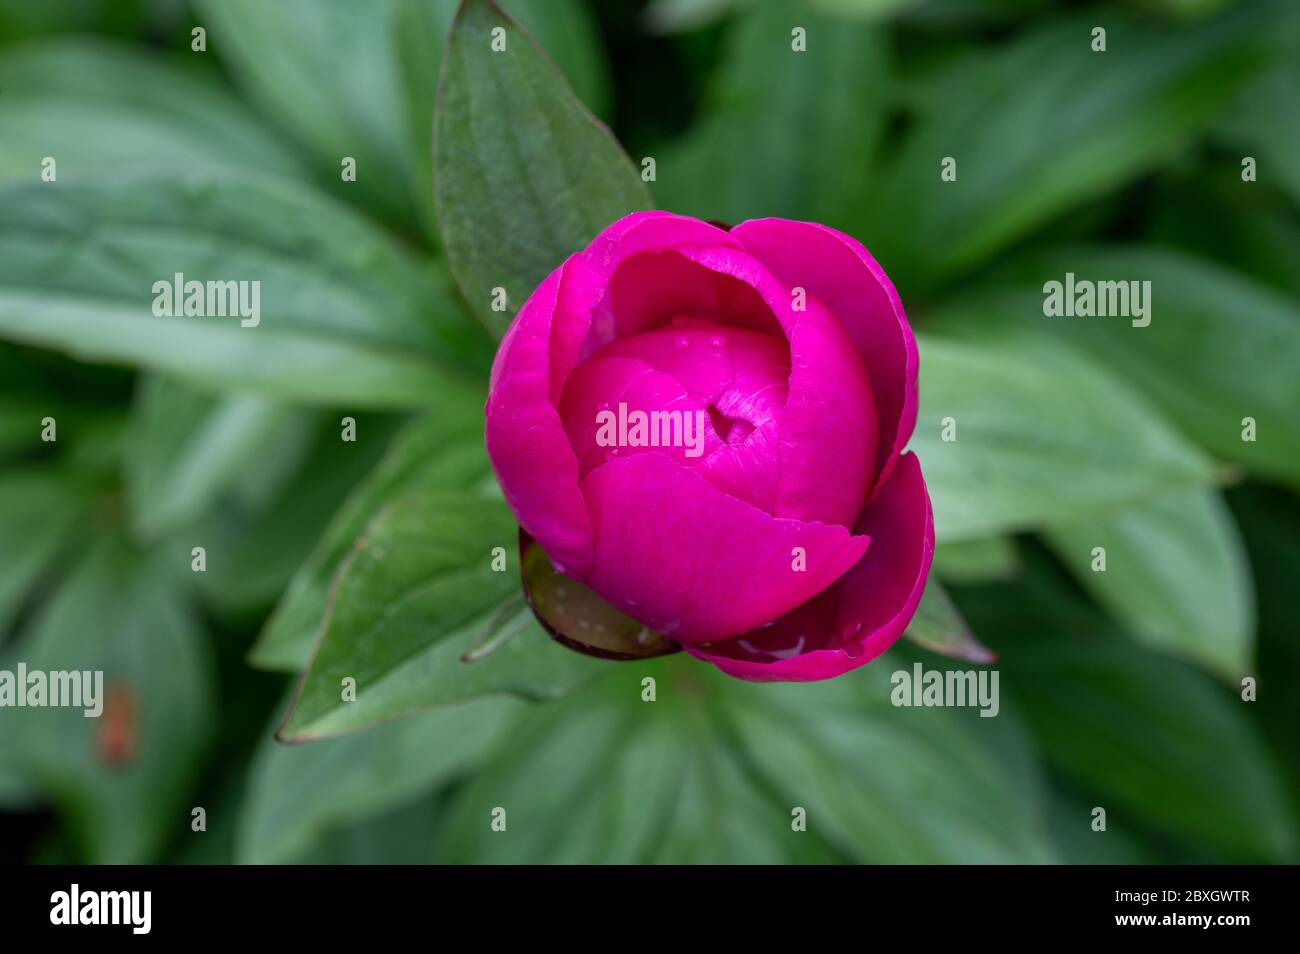 Blossom of pink peony flowers close up Stock Photo